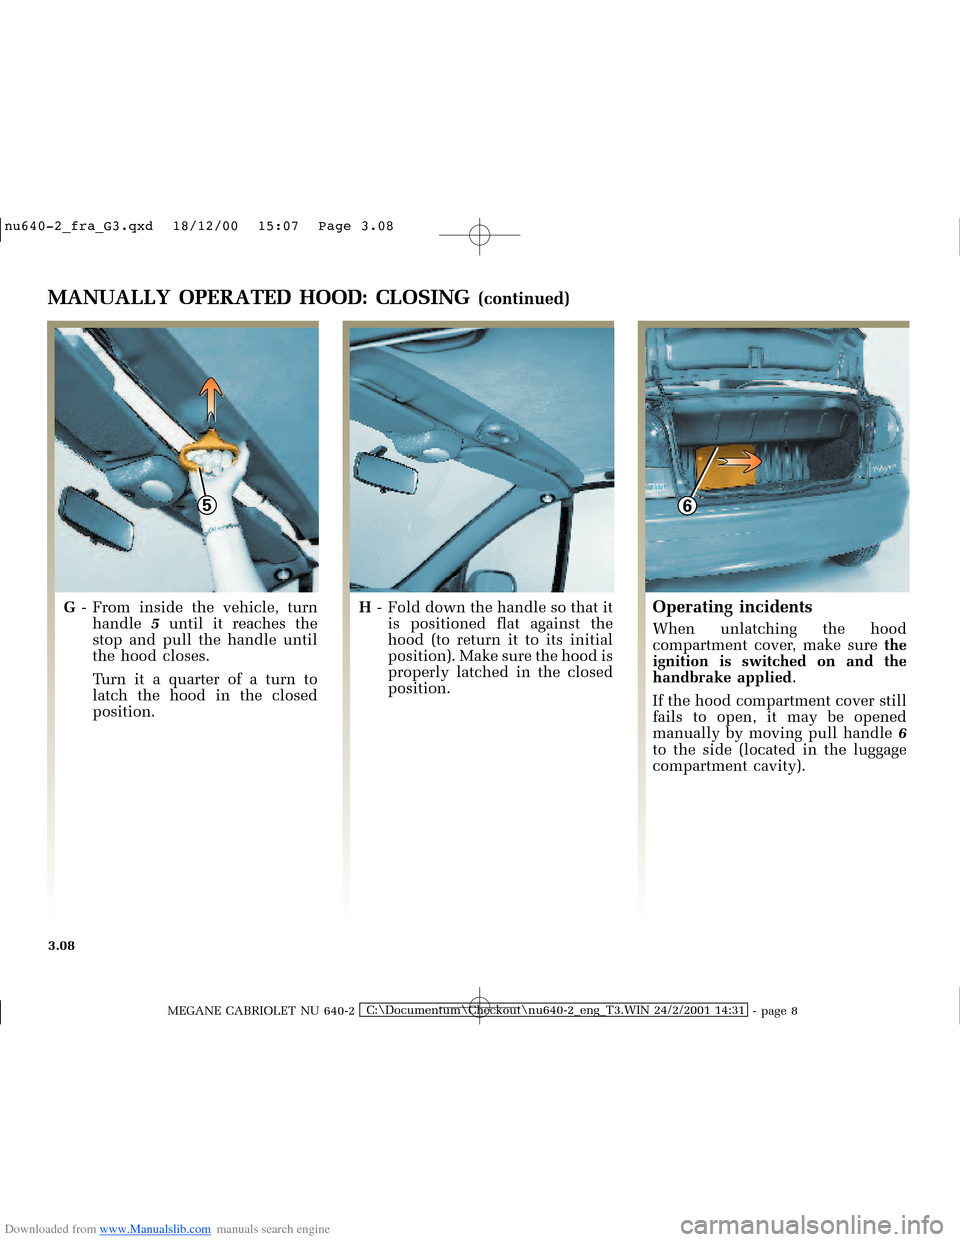 RENAULT MEGANE 2000 X64 / 1.G Owners Manual Downloaded from www.Manualslib.com manuals search engine 65
�Q�X������B�I�U�D�B�*���T�[�G� � ��������� � ������ � �3�D�J�H� ����
MEGANE CABRIOLET NU 640-2C:\Documentum\C